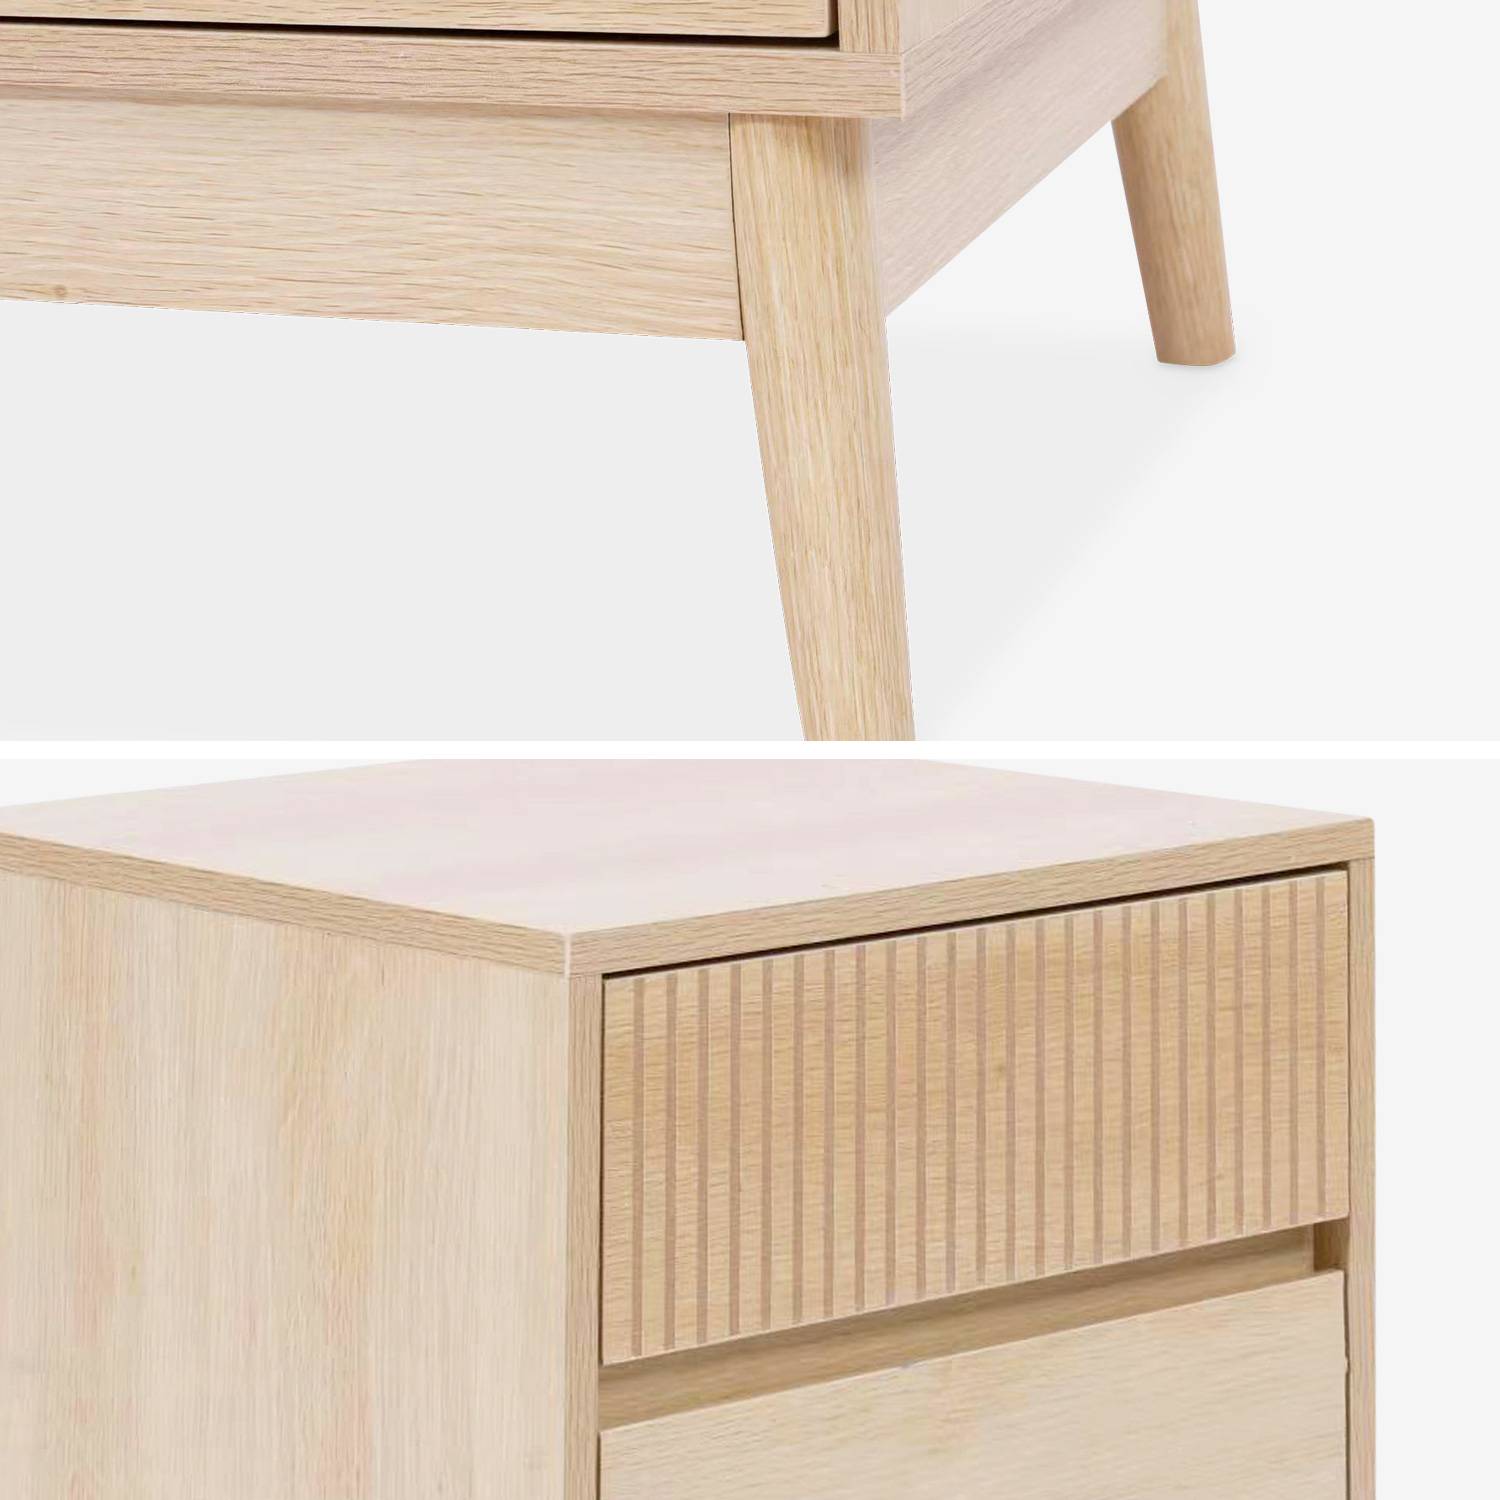 Grooved wooden bedside table with 2 drawers, 40x39x48cm, Linear - Natural Wood colour,sweeek,Photo5